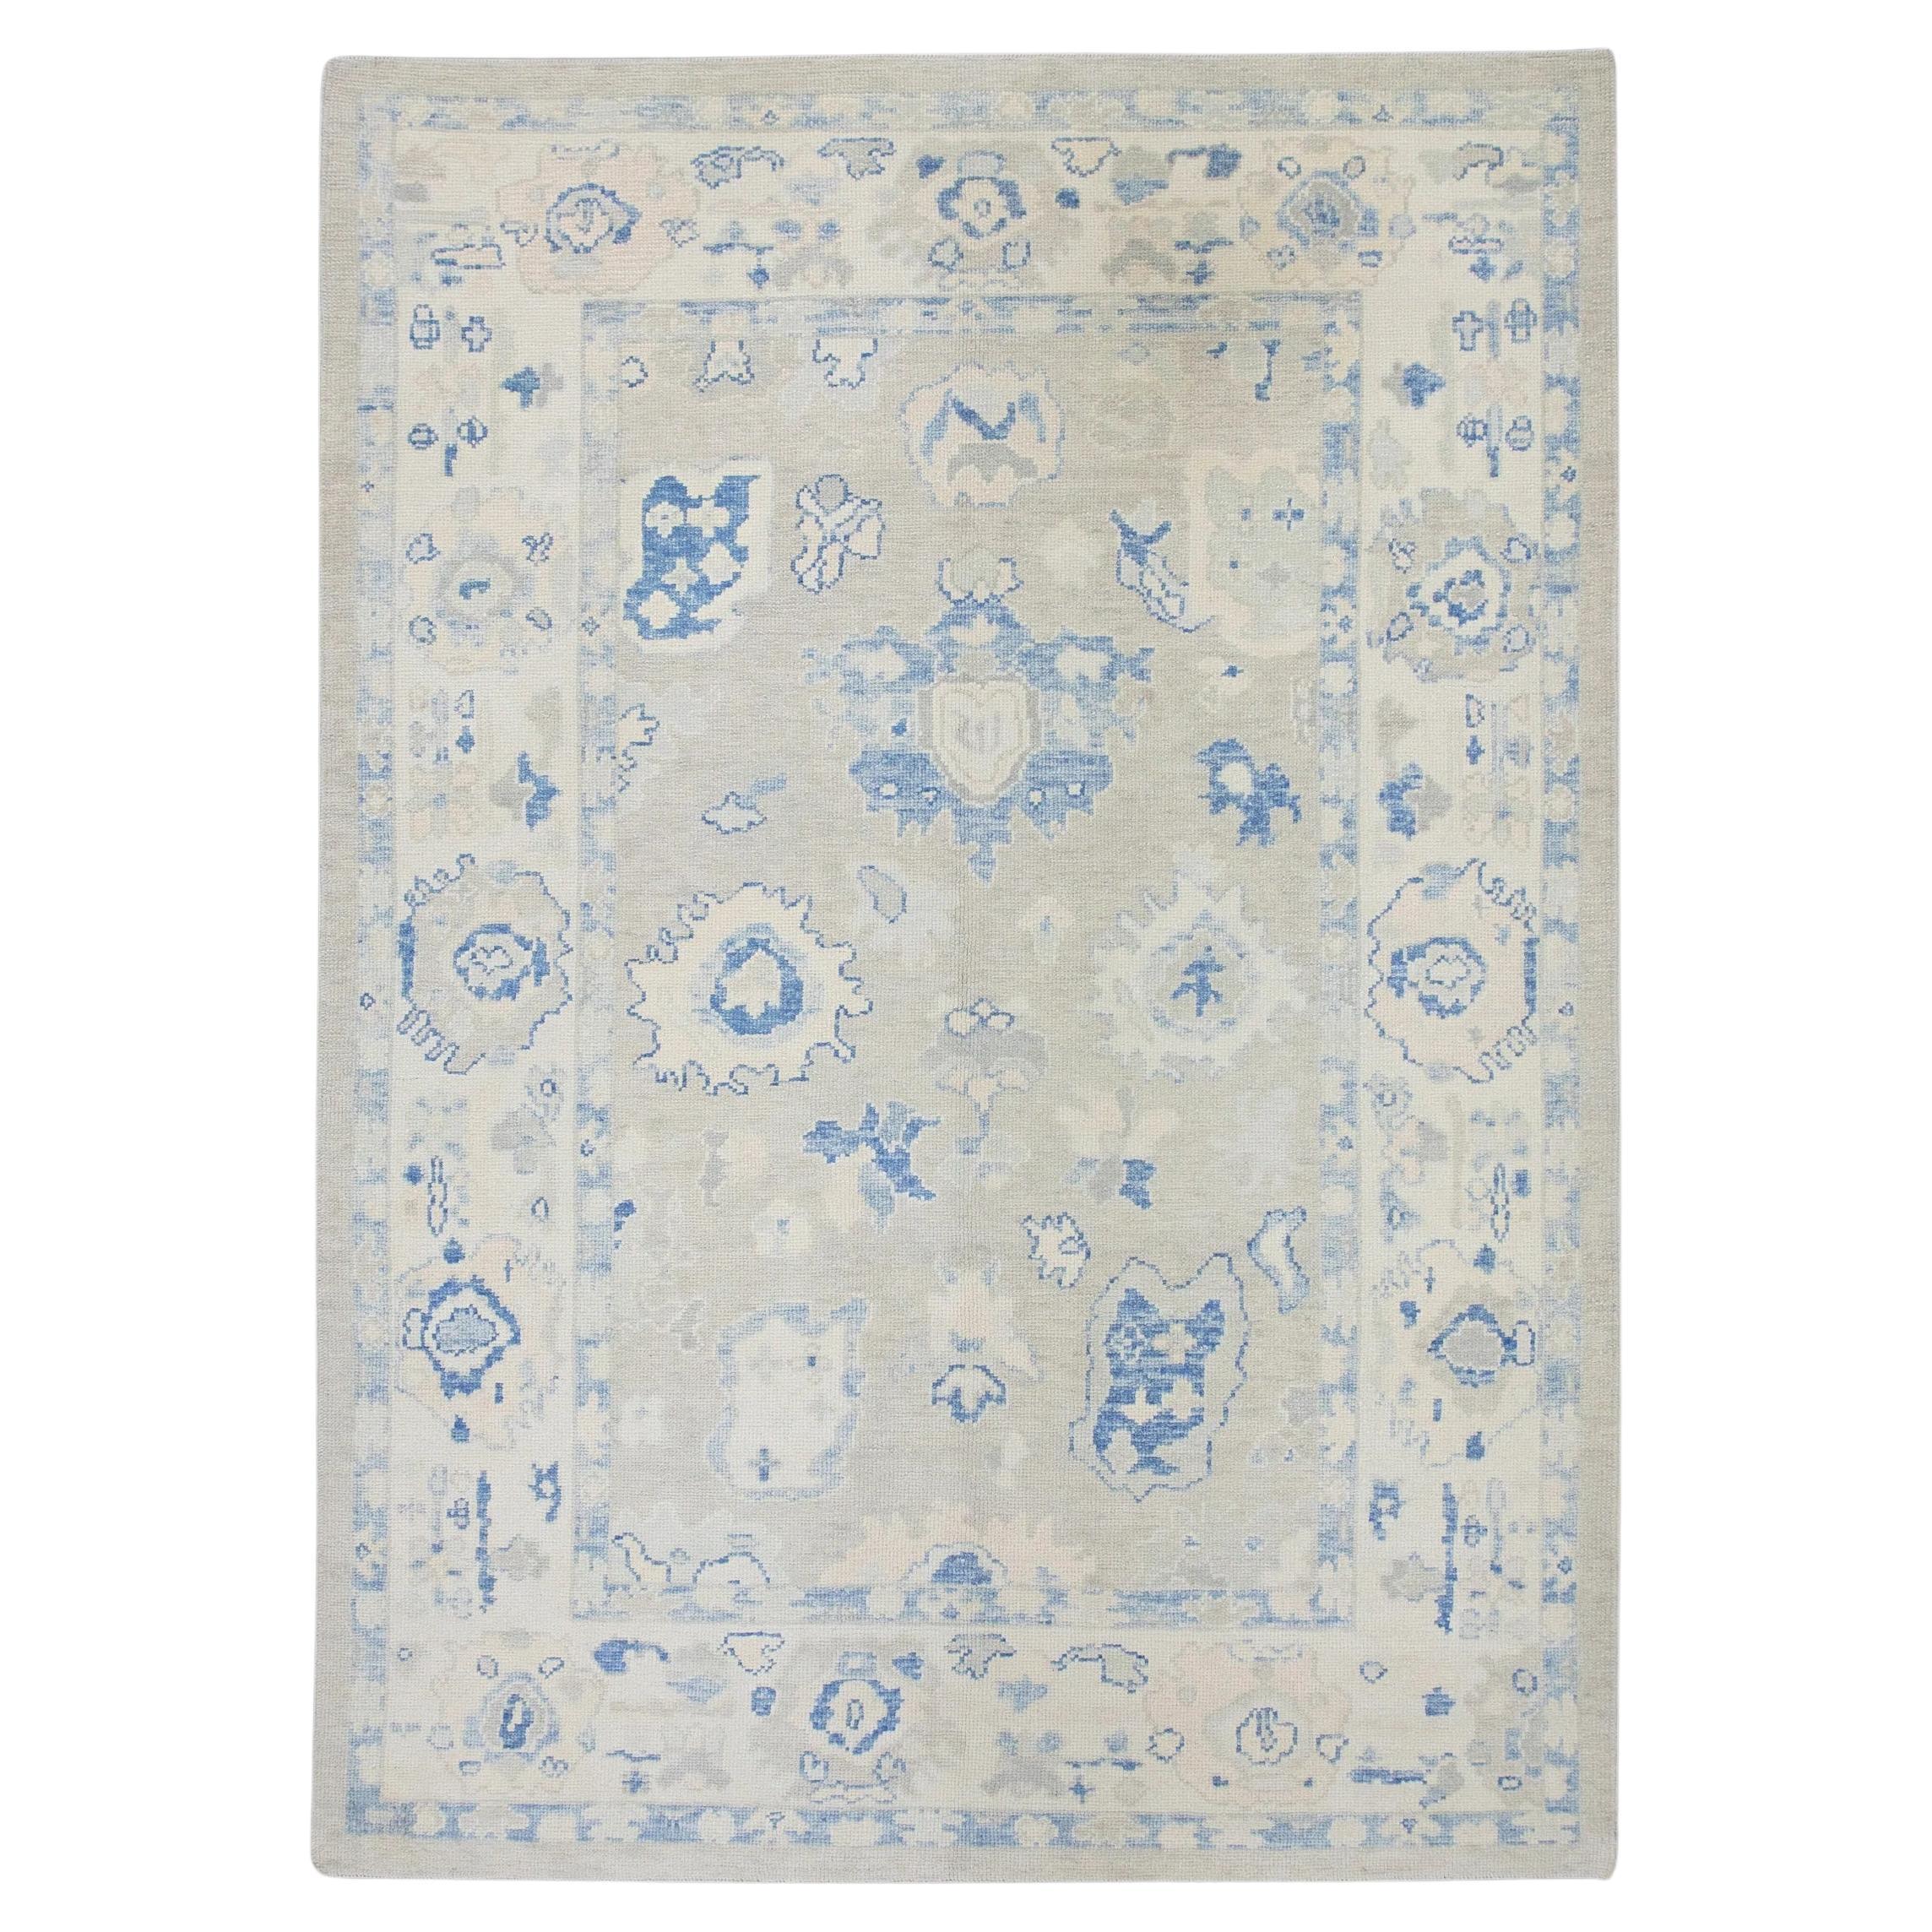 Blue Floral Handwoven Wool Turkish Oushak Rug 6'1" x 8'9" For Sale